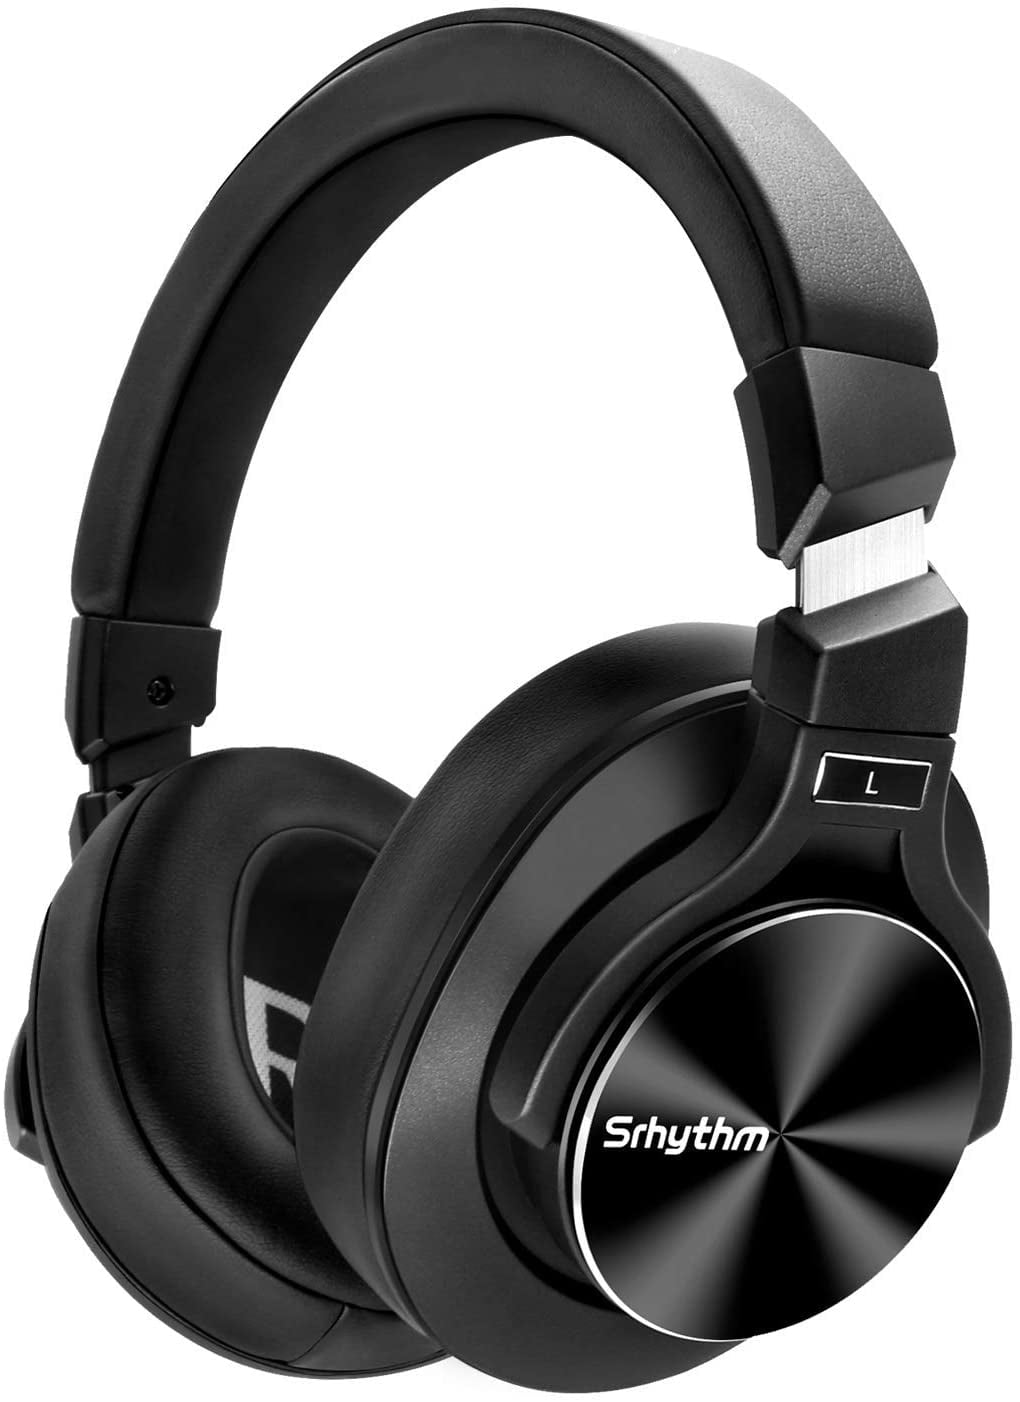 Crystal Purple Srhythm NC75 Pro Noise Cancelling Headphones Bluetooth V5.0 Wireless,40 Hours Playtime Headsets Over Ear with Microphones&Fast Charge for TV/PC/Cell Phone 